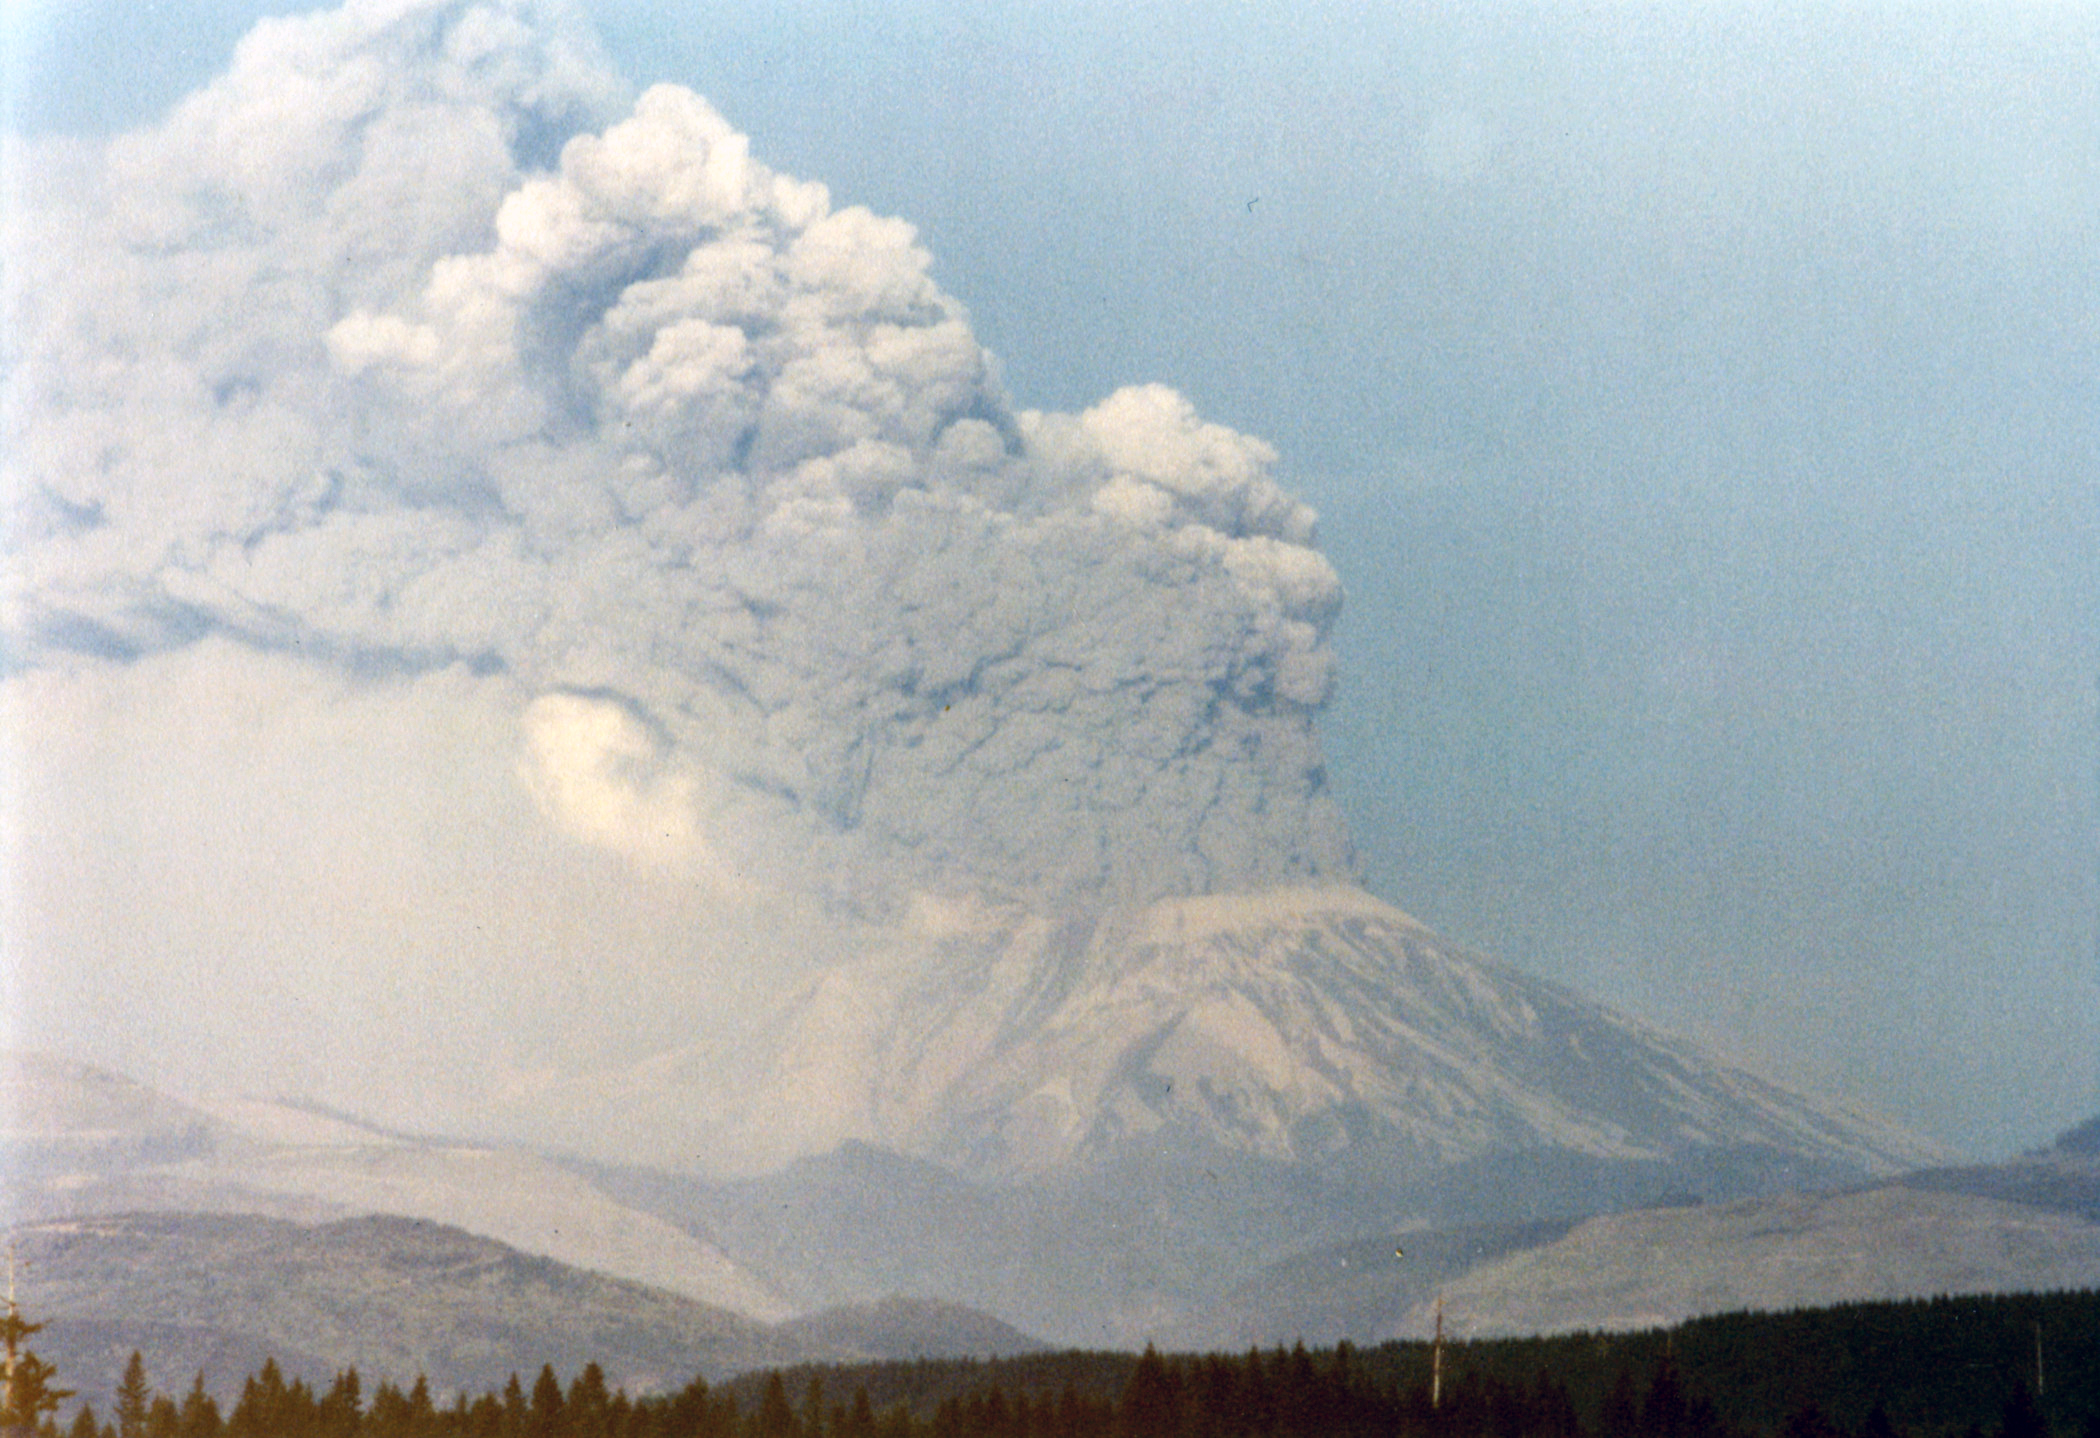 Mount St. Helens erupting, May 18, 1980